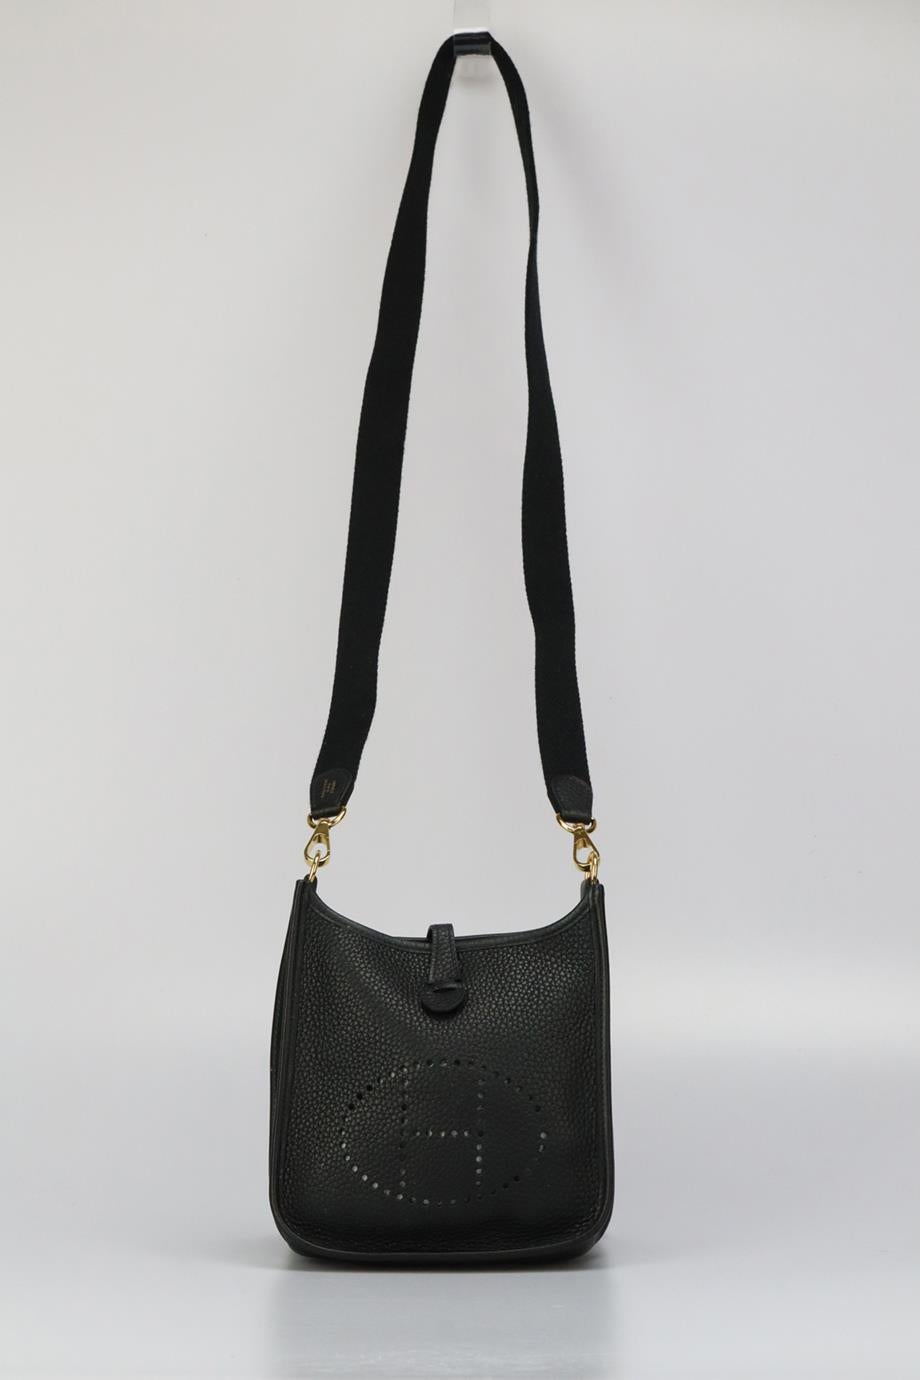 Hermès 2020 Evelyne Tmp Clemence Leather Shoulder Bag. Black. Snap button fastening - Front. Comes with - dustbag. Height: 7.1 In. Width: 6.7 In. Depth: 2.2 In. Strap drop: 22.3 In. Condition: Used. Very good condition - Few light marks to exterior